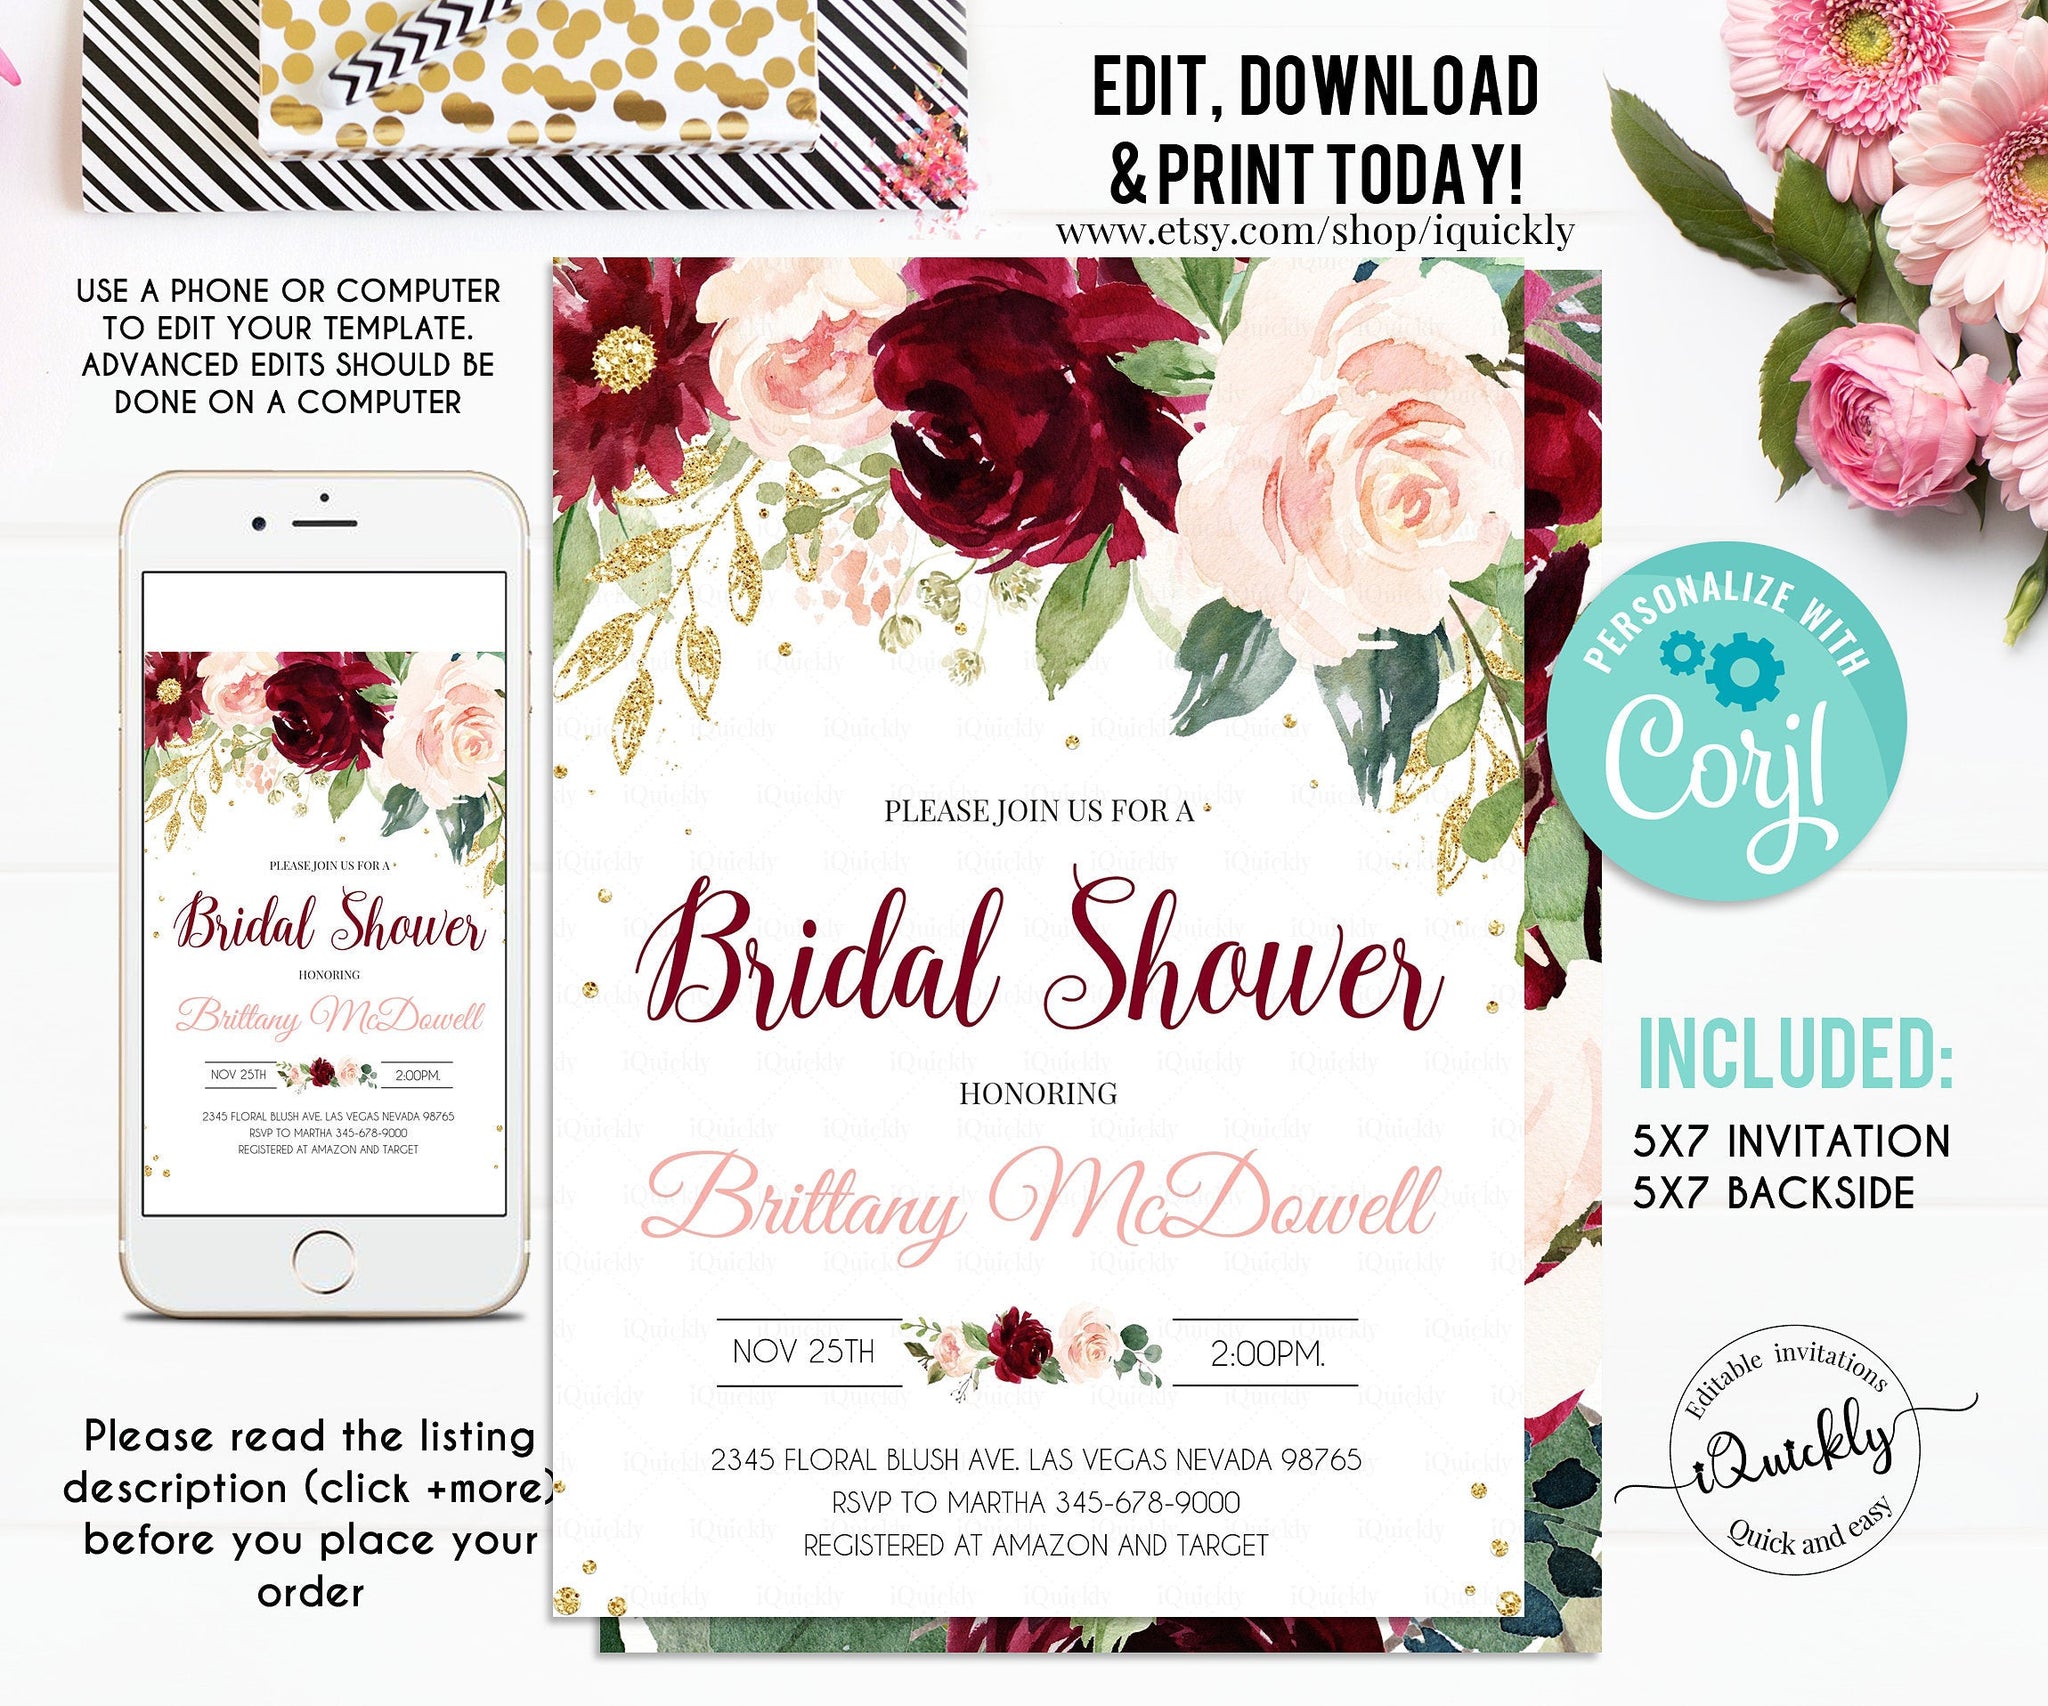 Burgundy Bridal shower invitation, Editable Floral Engagements Invitations, bachelor party Invites Template Printable Instant download